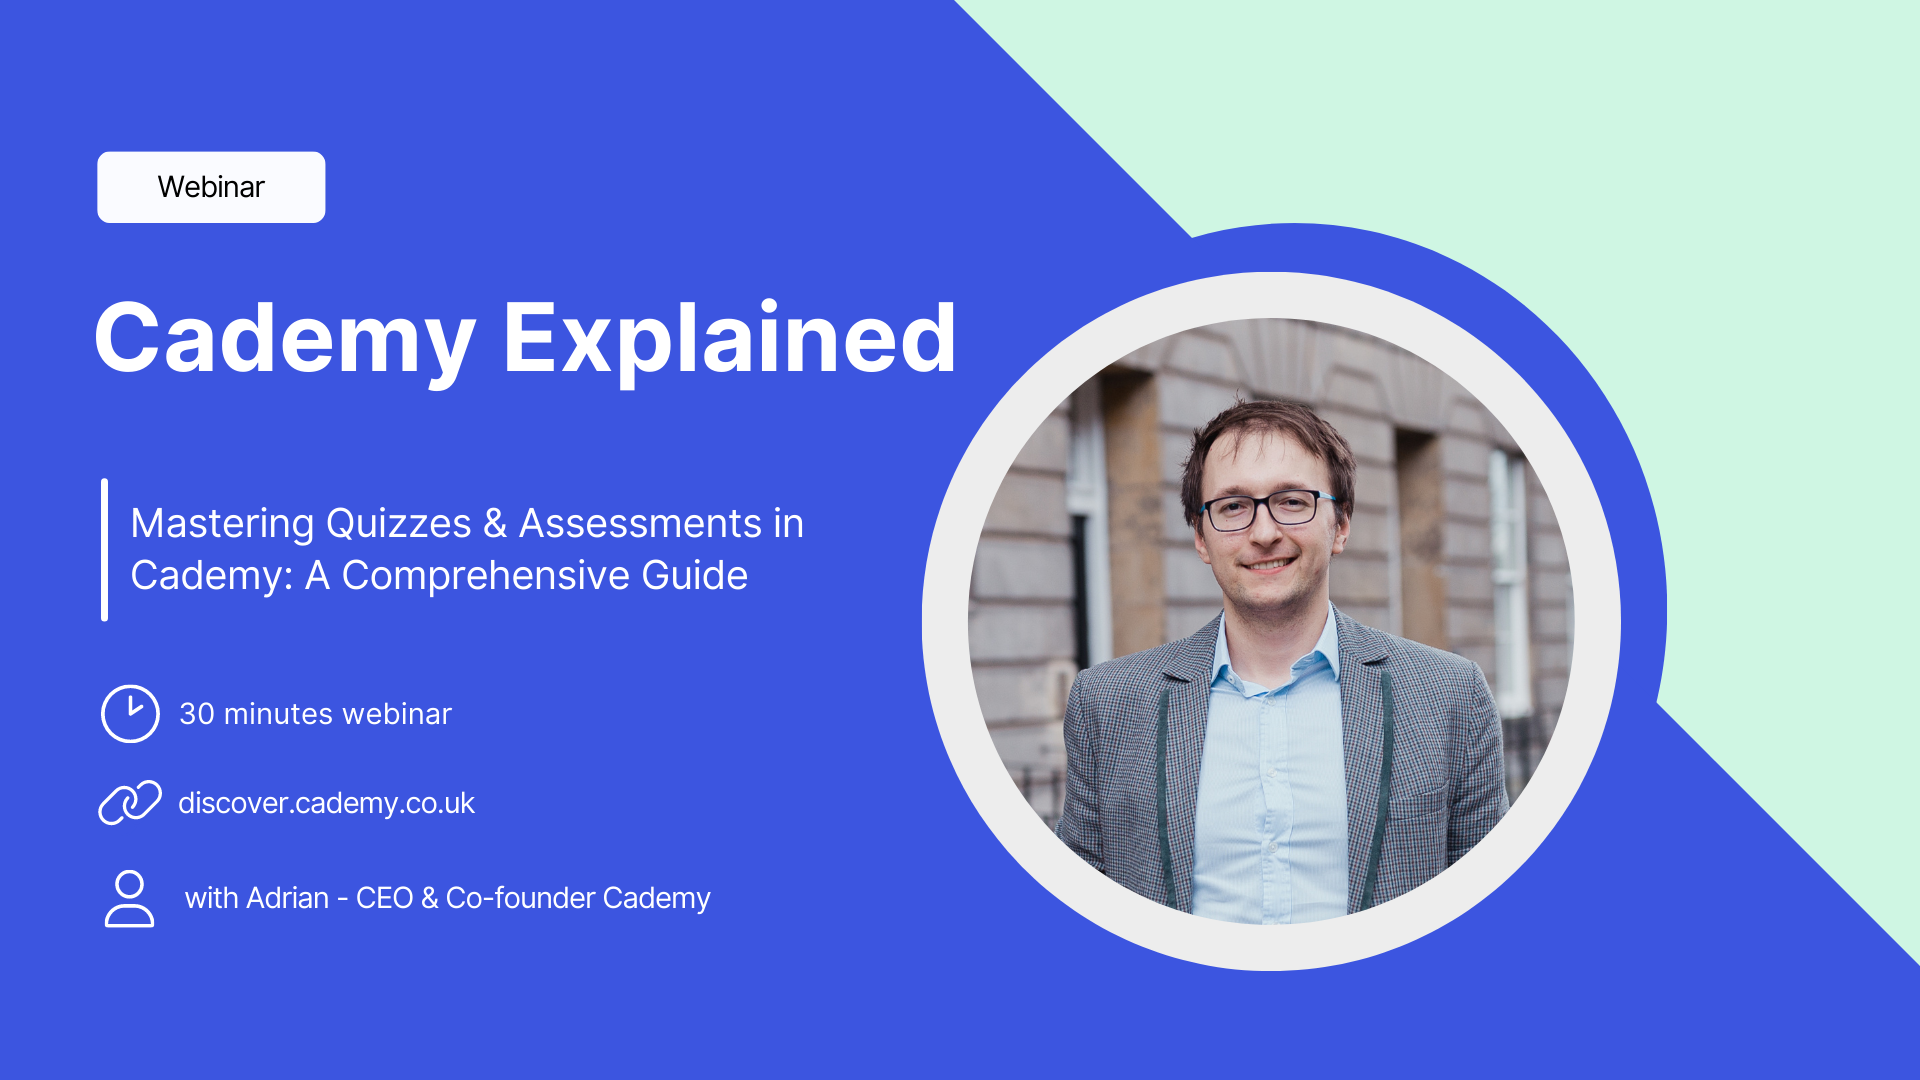 Mastering Quizzes & Assessments in Cademy: A Comprehensive Guide